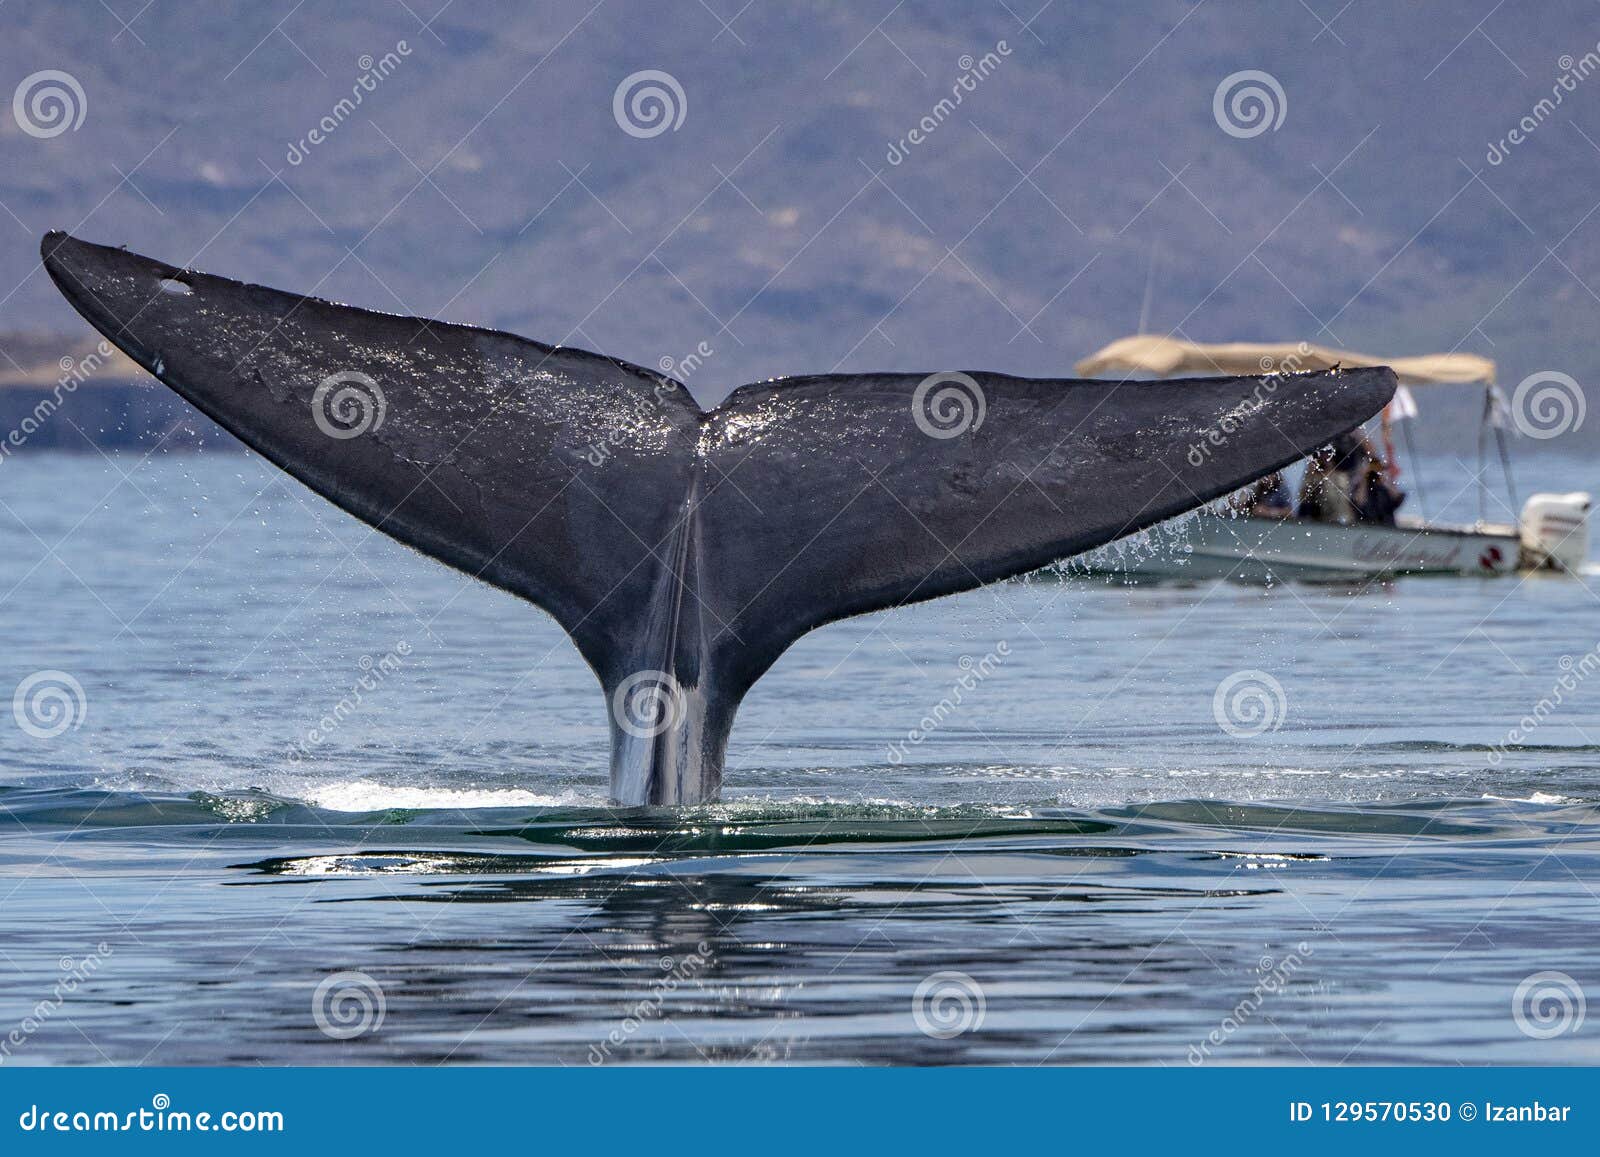 Blue Whale the Biggest Animal in the World Tail Detail Stock Photo - Image of  mammal, conservation: 129570530